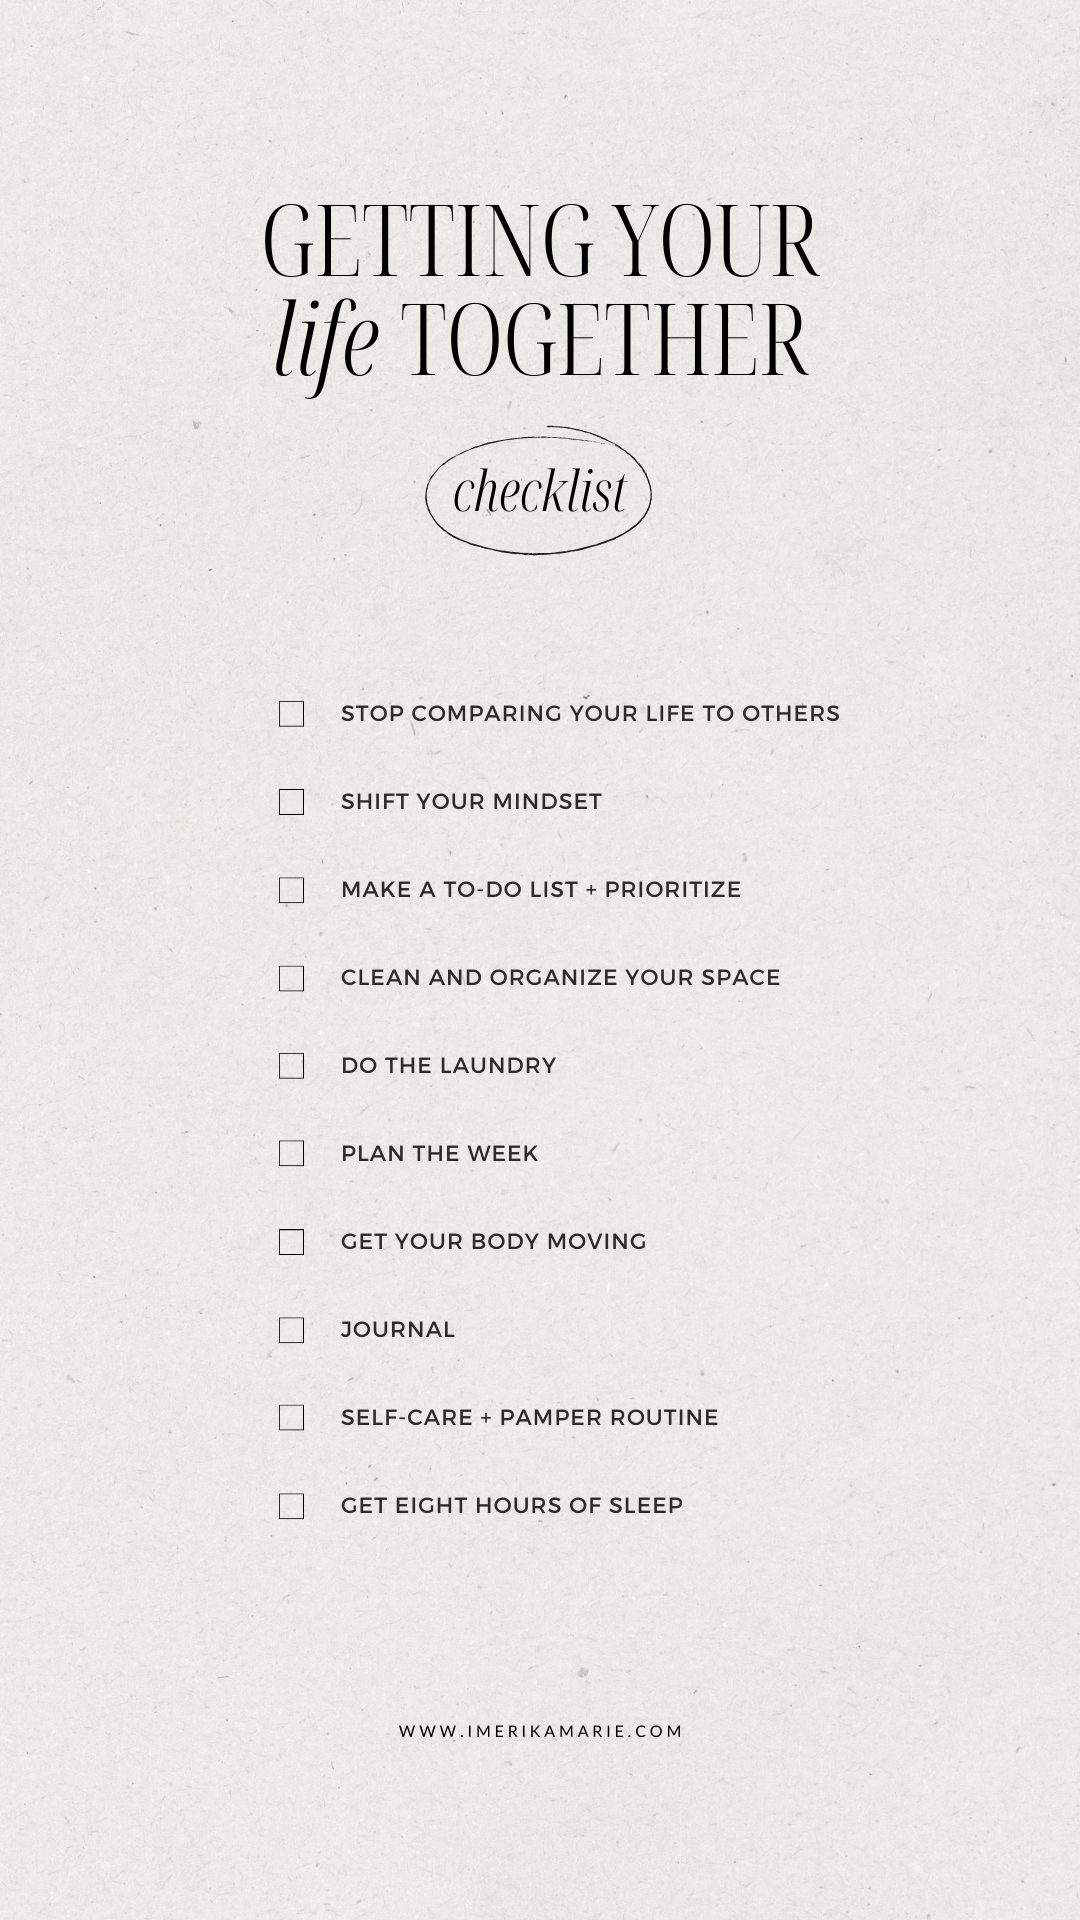 30 Small Things To Do To Make Life Easier + Checklist